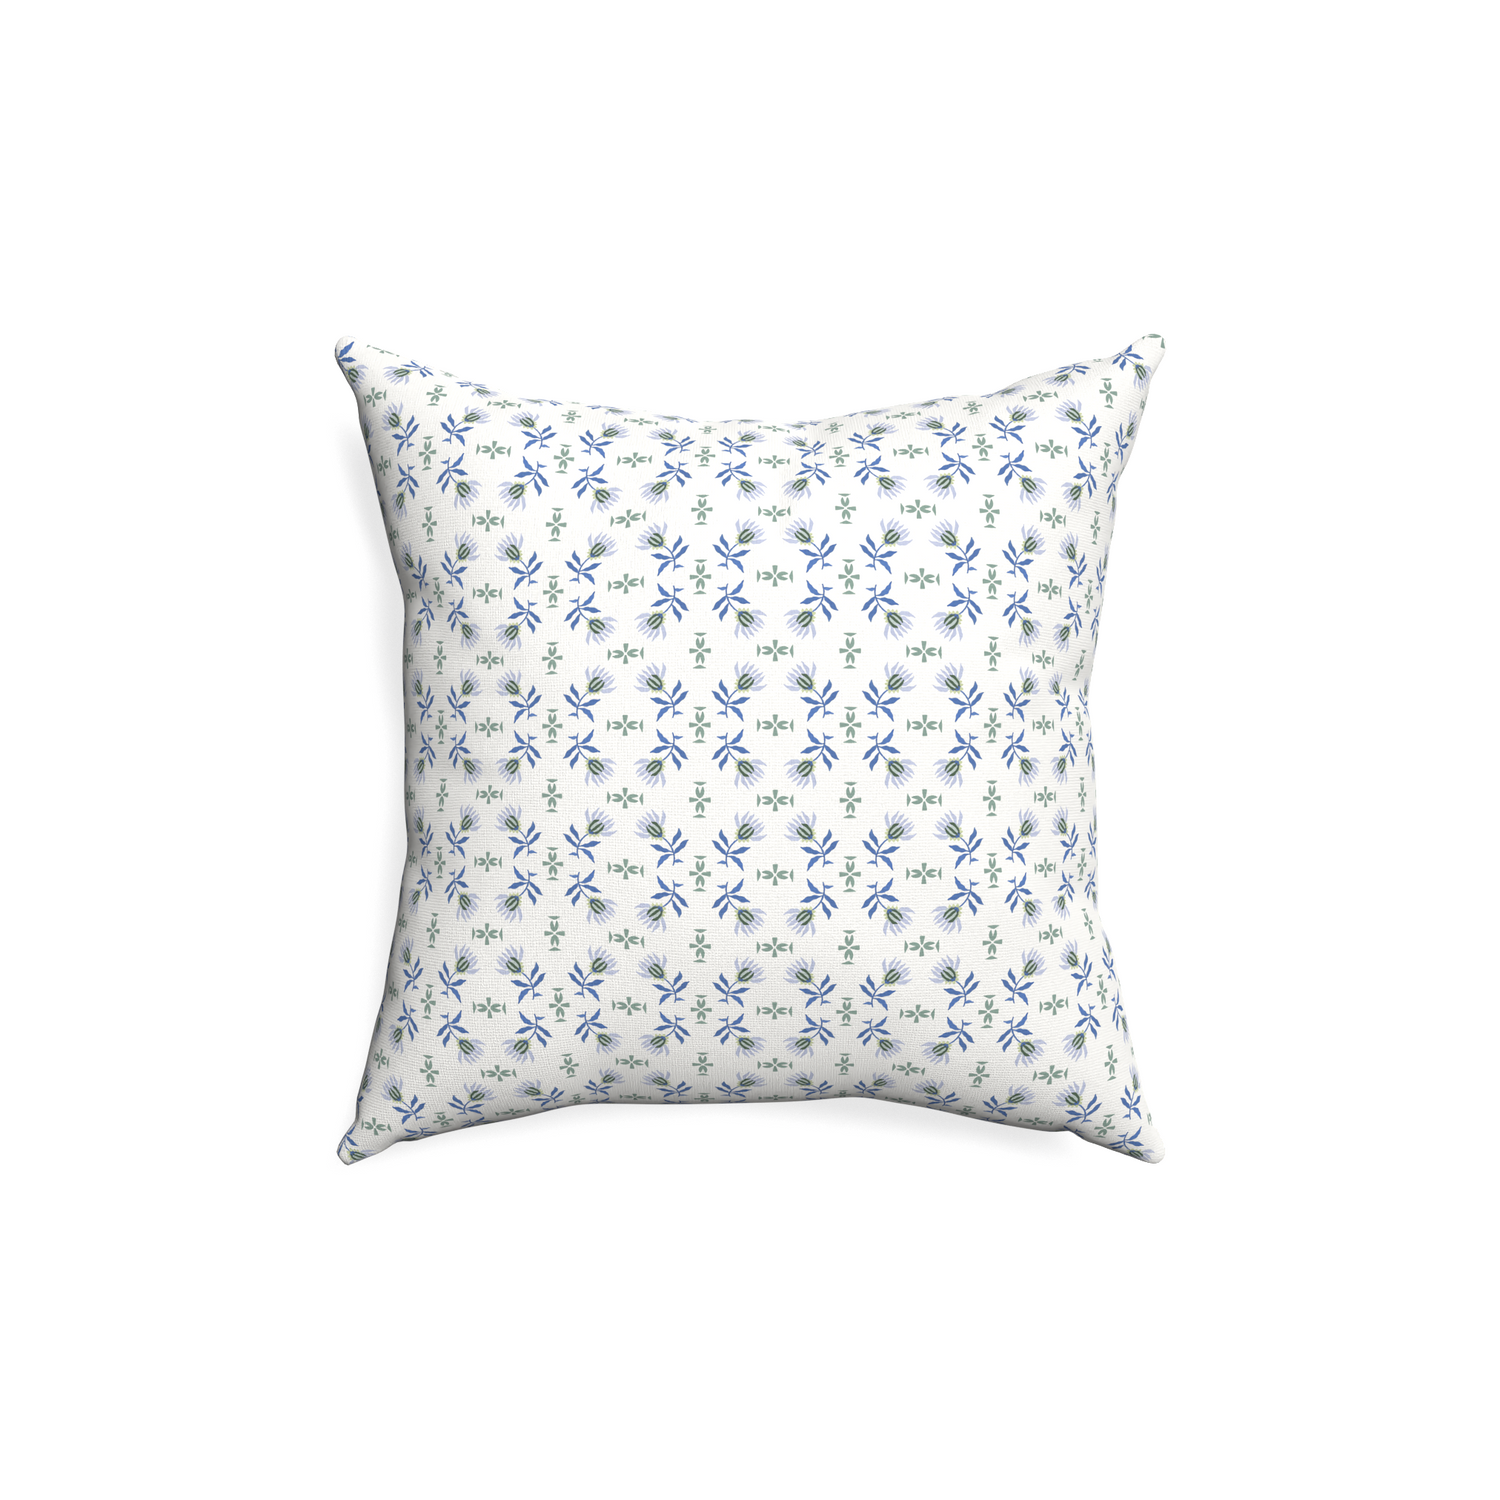 18-square lee custom blue & green floralpillow with none on white background